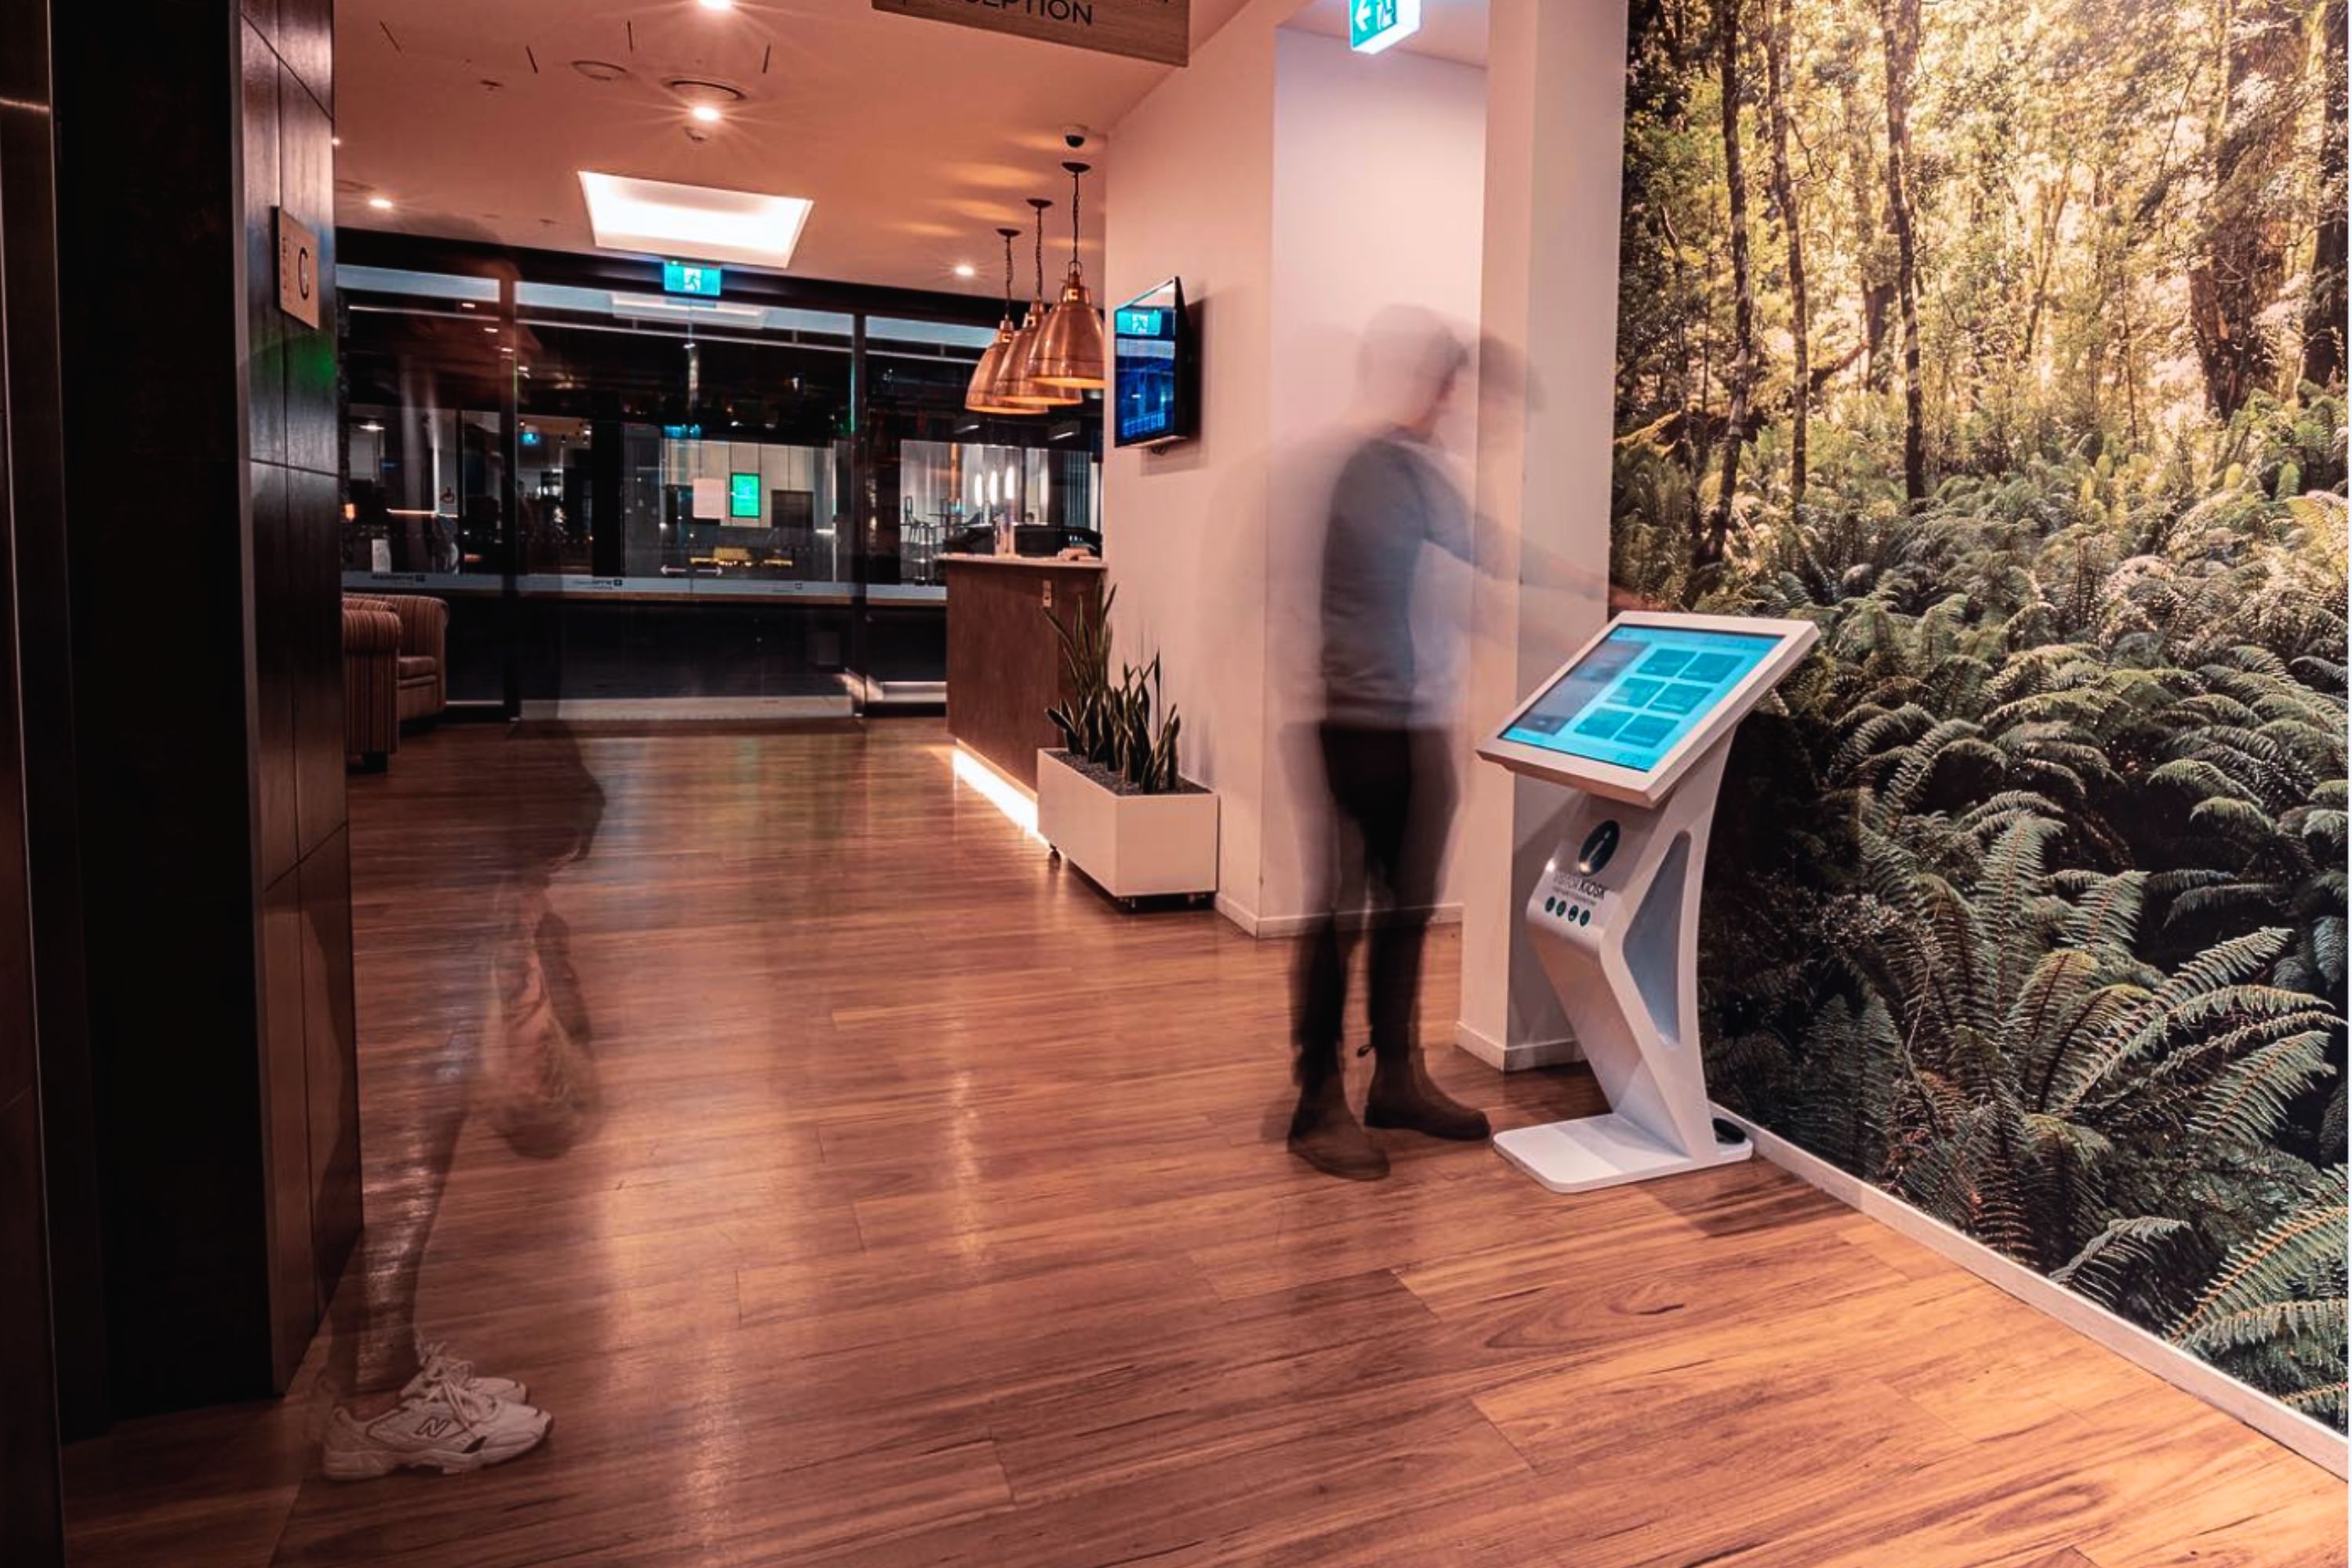 Long exposure photo of a man using a visitor kiosk booth in the warmly lit lobby of a hotel